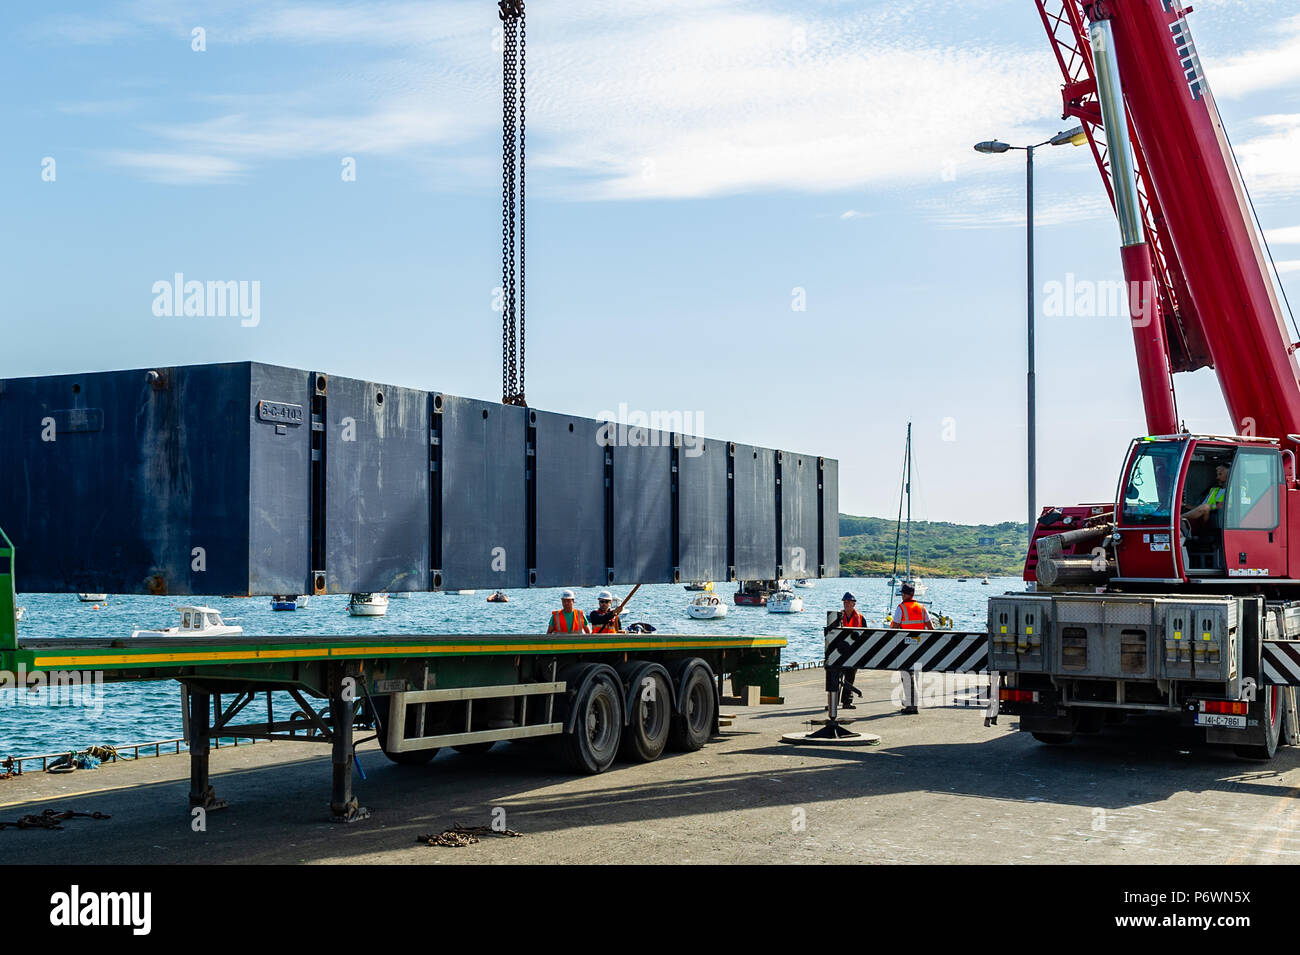 Schull, West Cork, Ireland. 3rd July, 2018. Contractors lift a section of the new pontoon into the water in Schull Harbour. The whole project will take approximately 4 weeks and will cost in the region of €800,000. Credit: Andy Gibson/Alamy Live News. Stock Photo